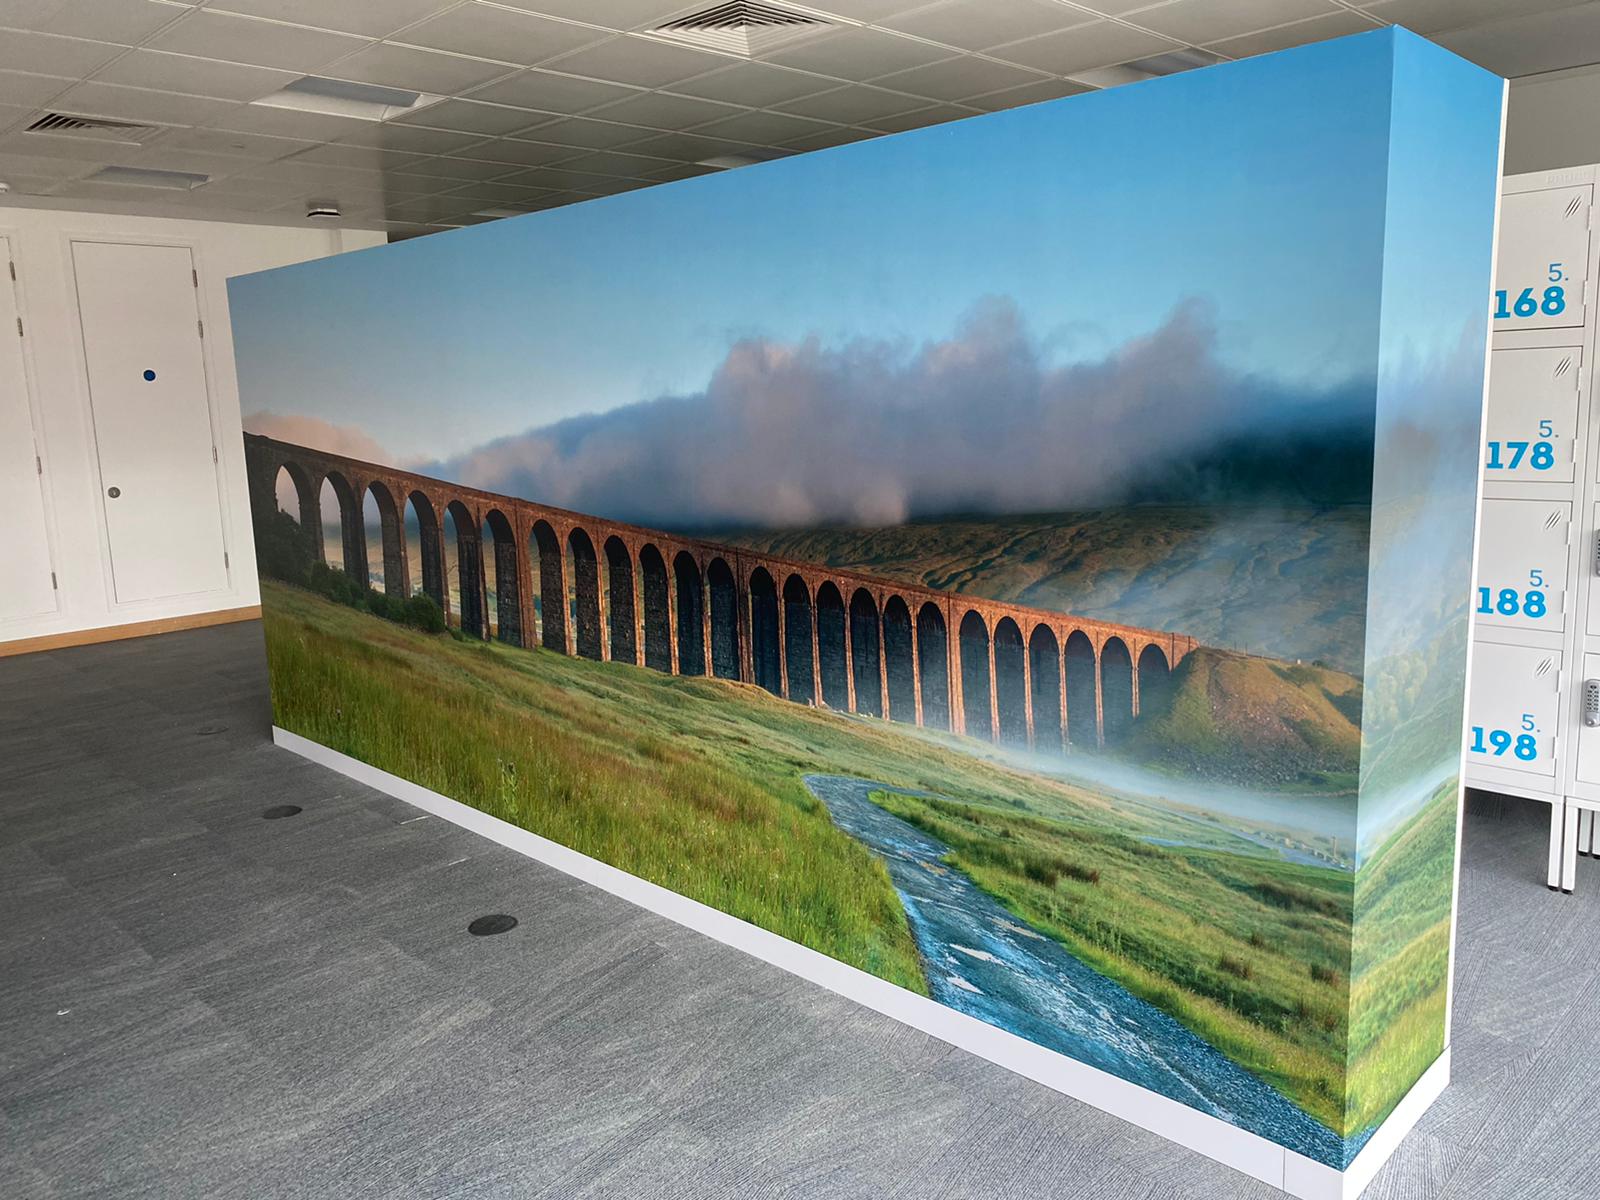 How office wall graphics can inspire your employees - Inspired Visual